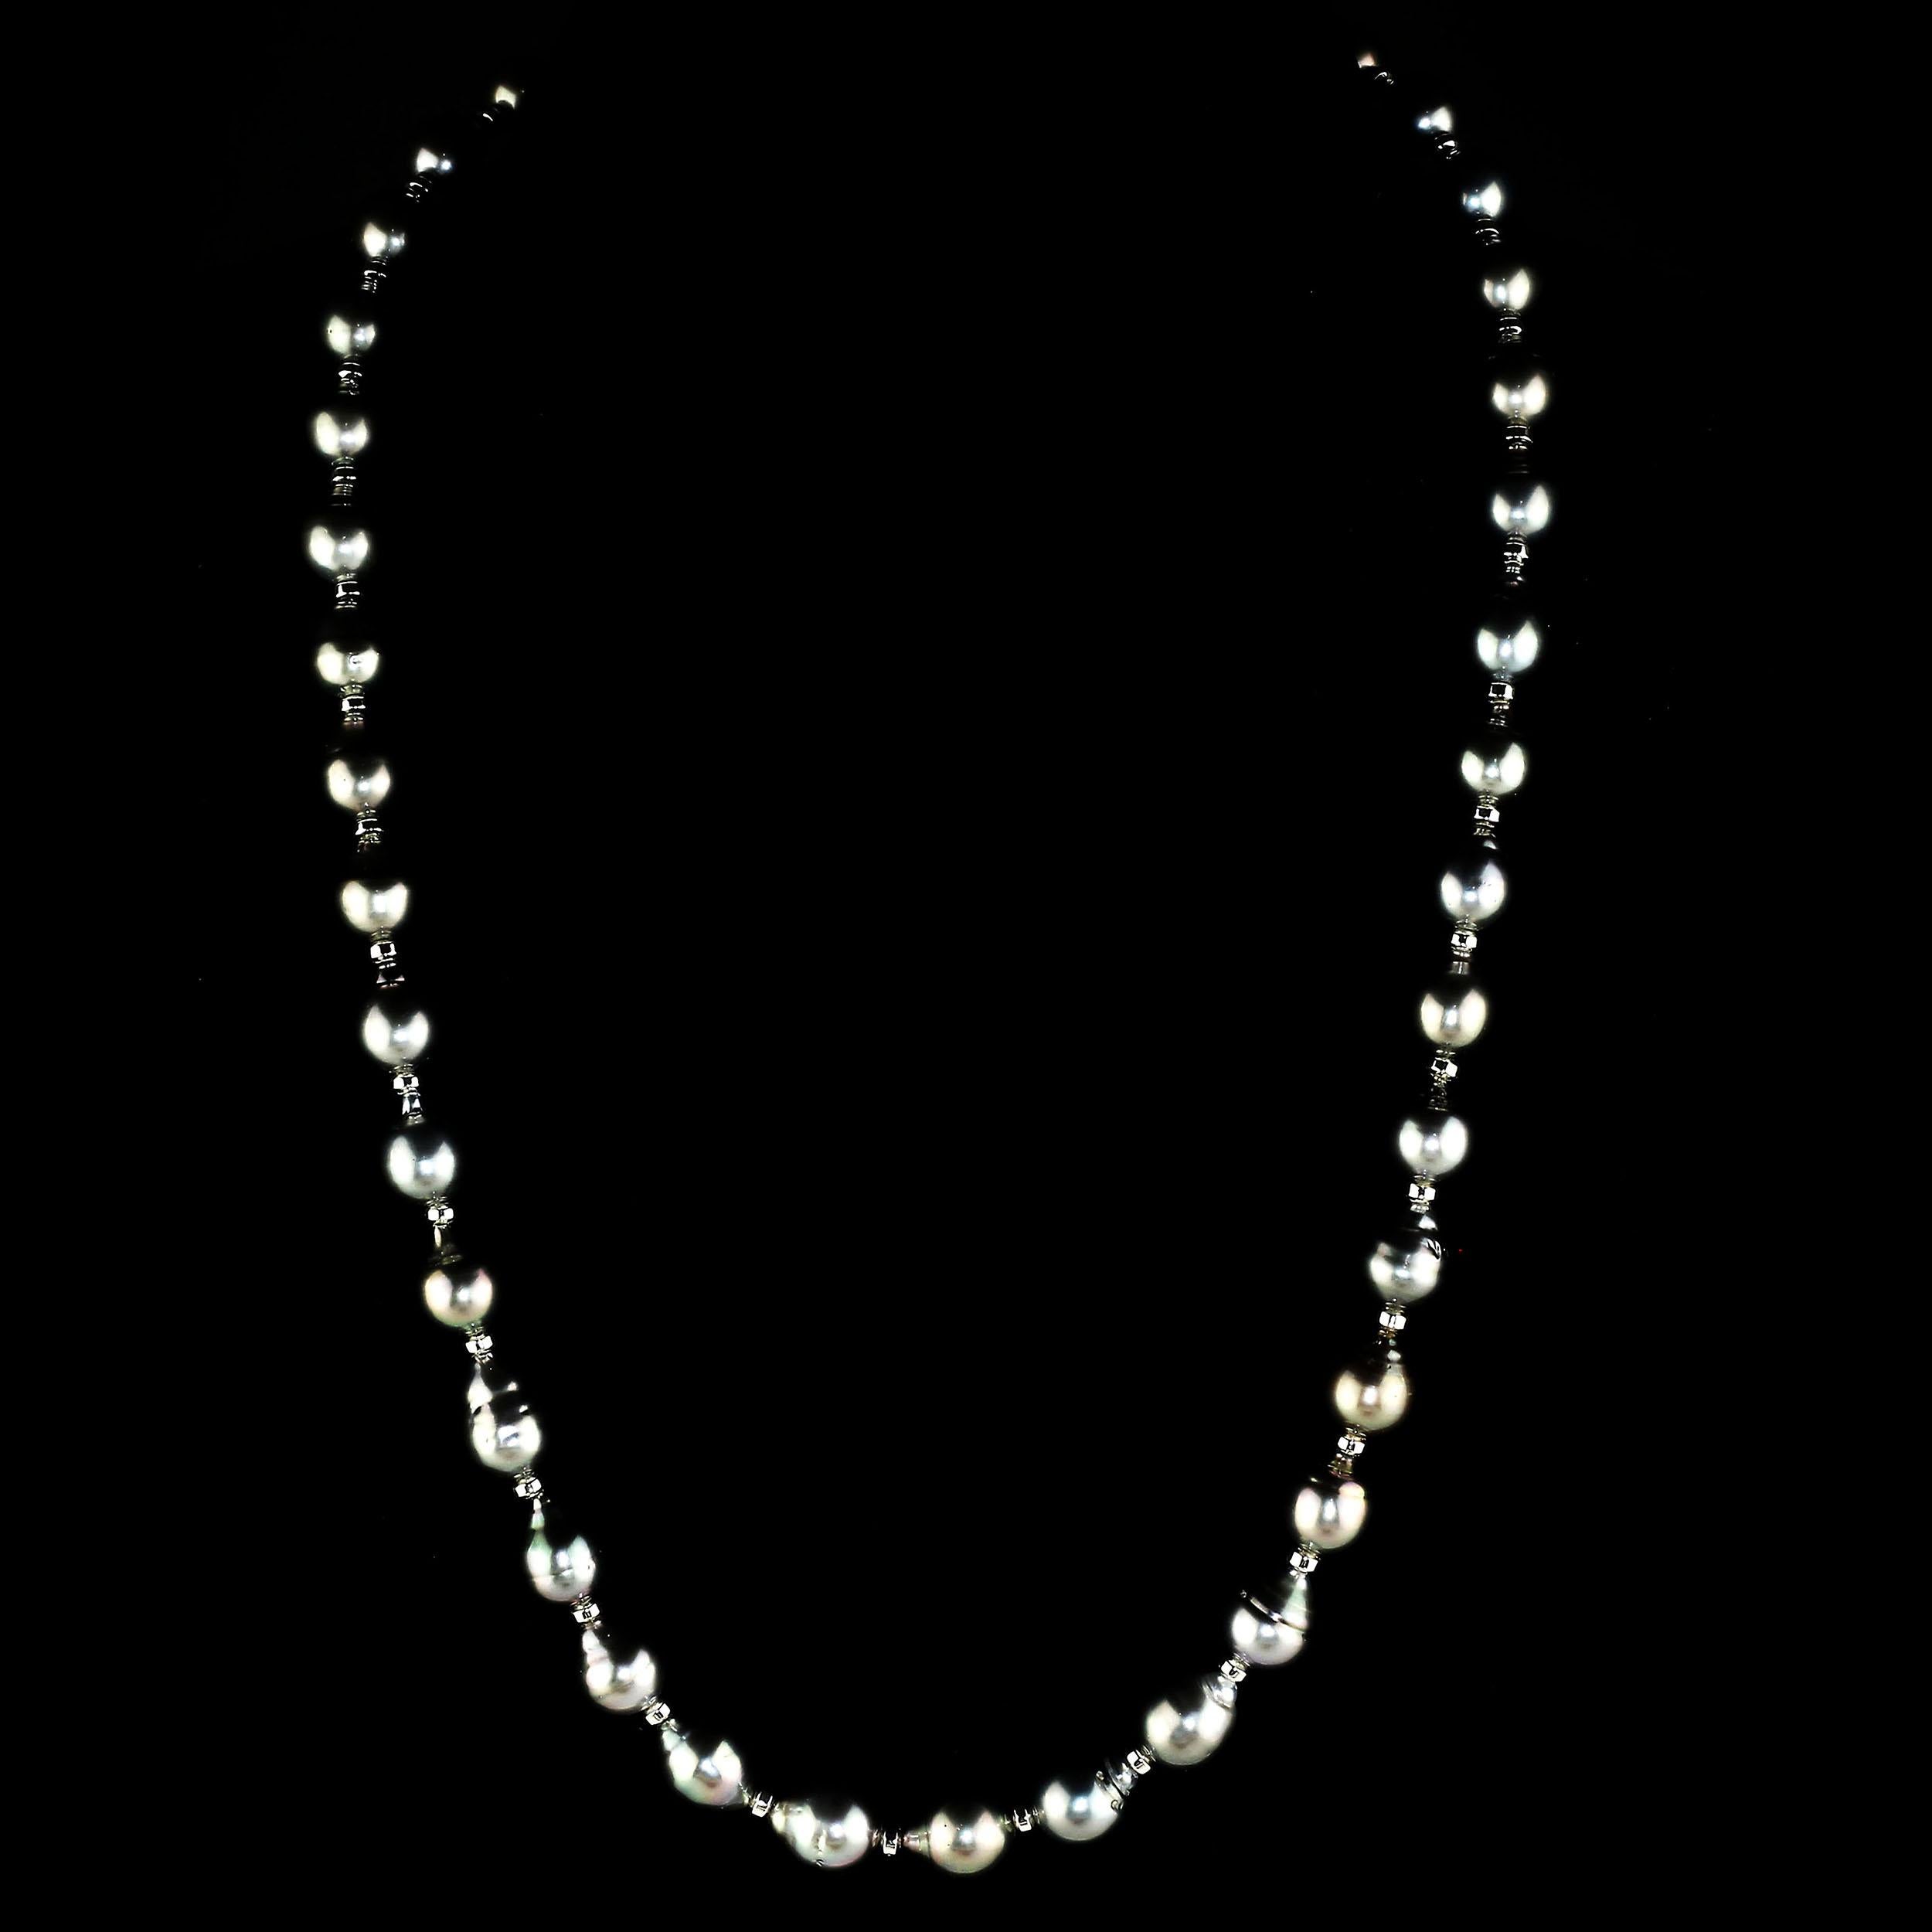 Bead AJD Silver, Iridescent Tahitian Pearl Necklace & Silver Accents June Birthstone